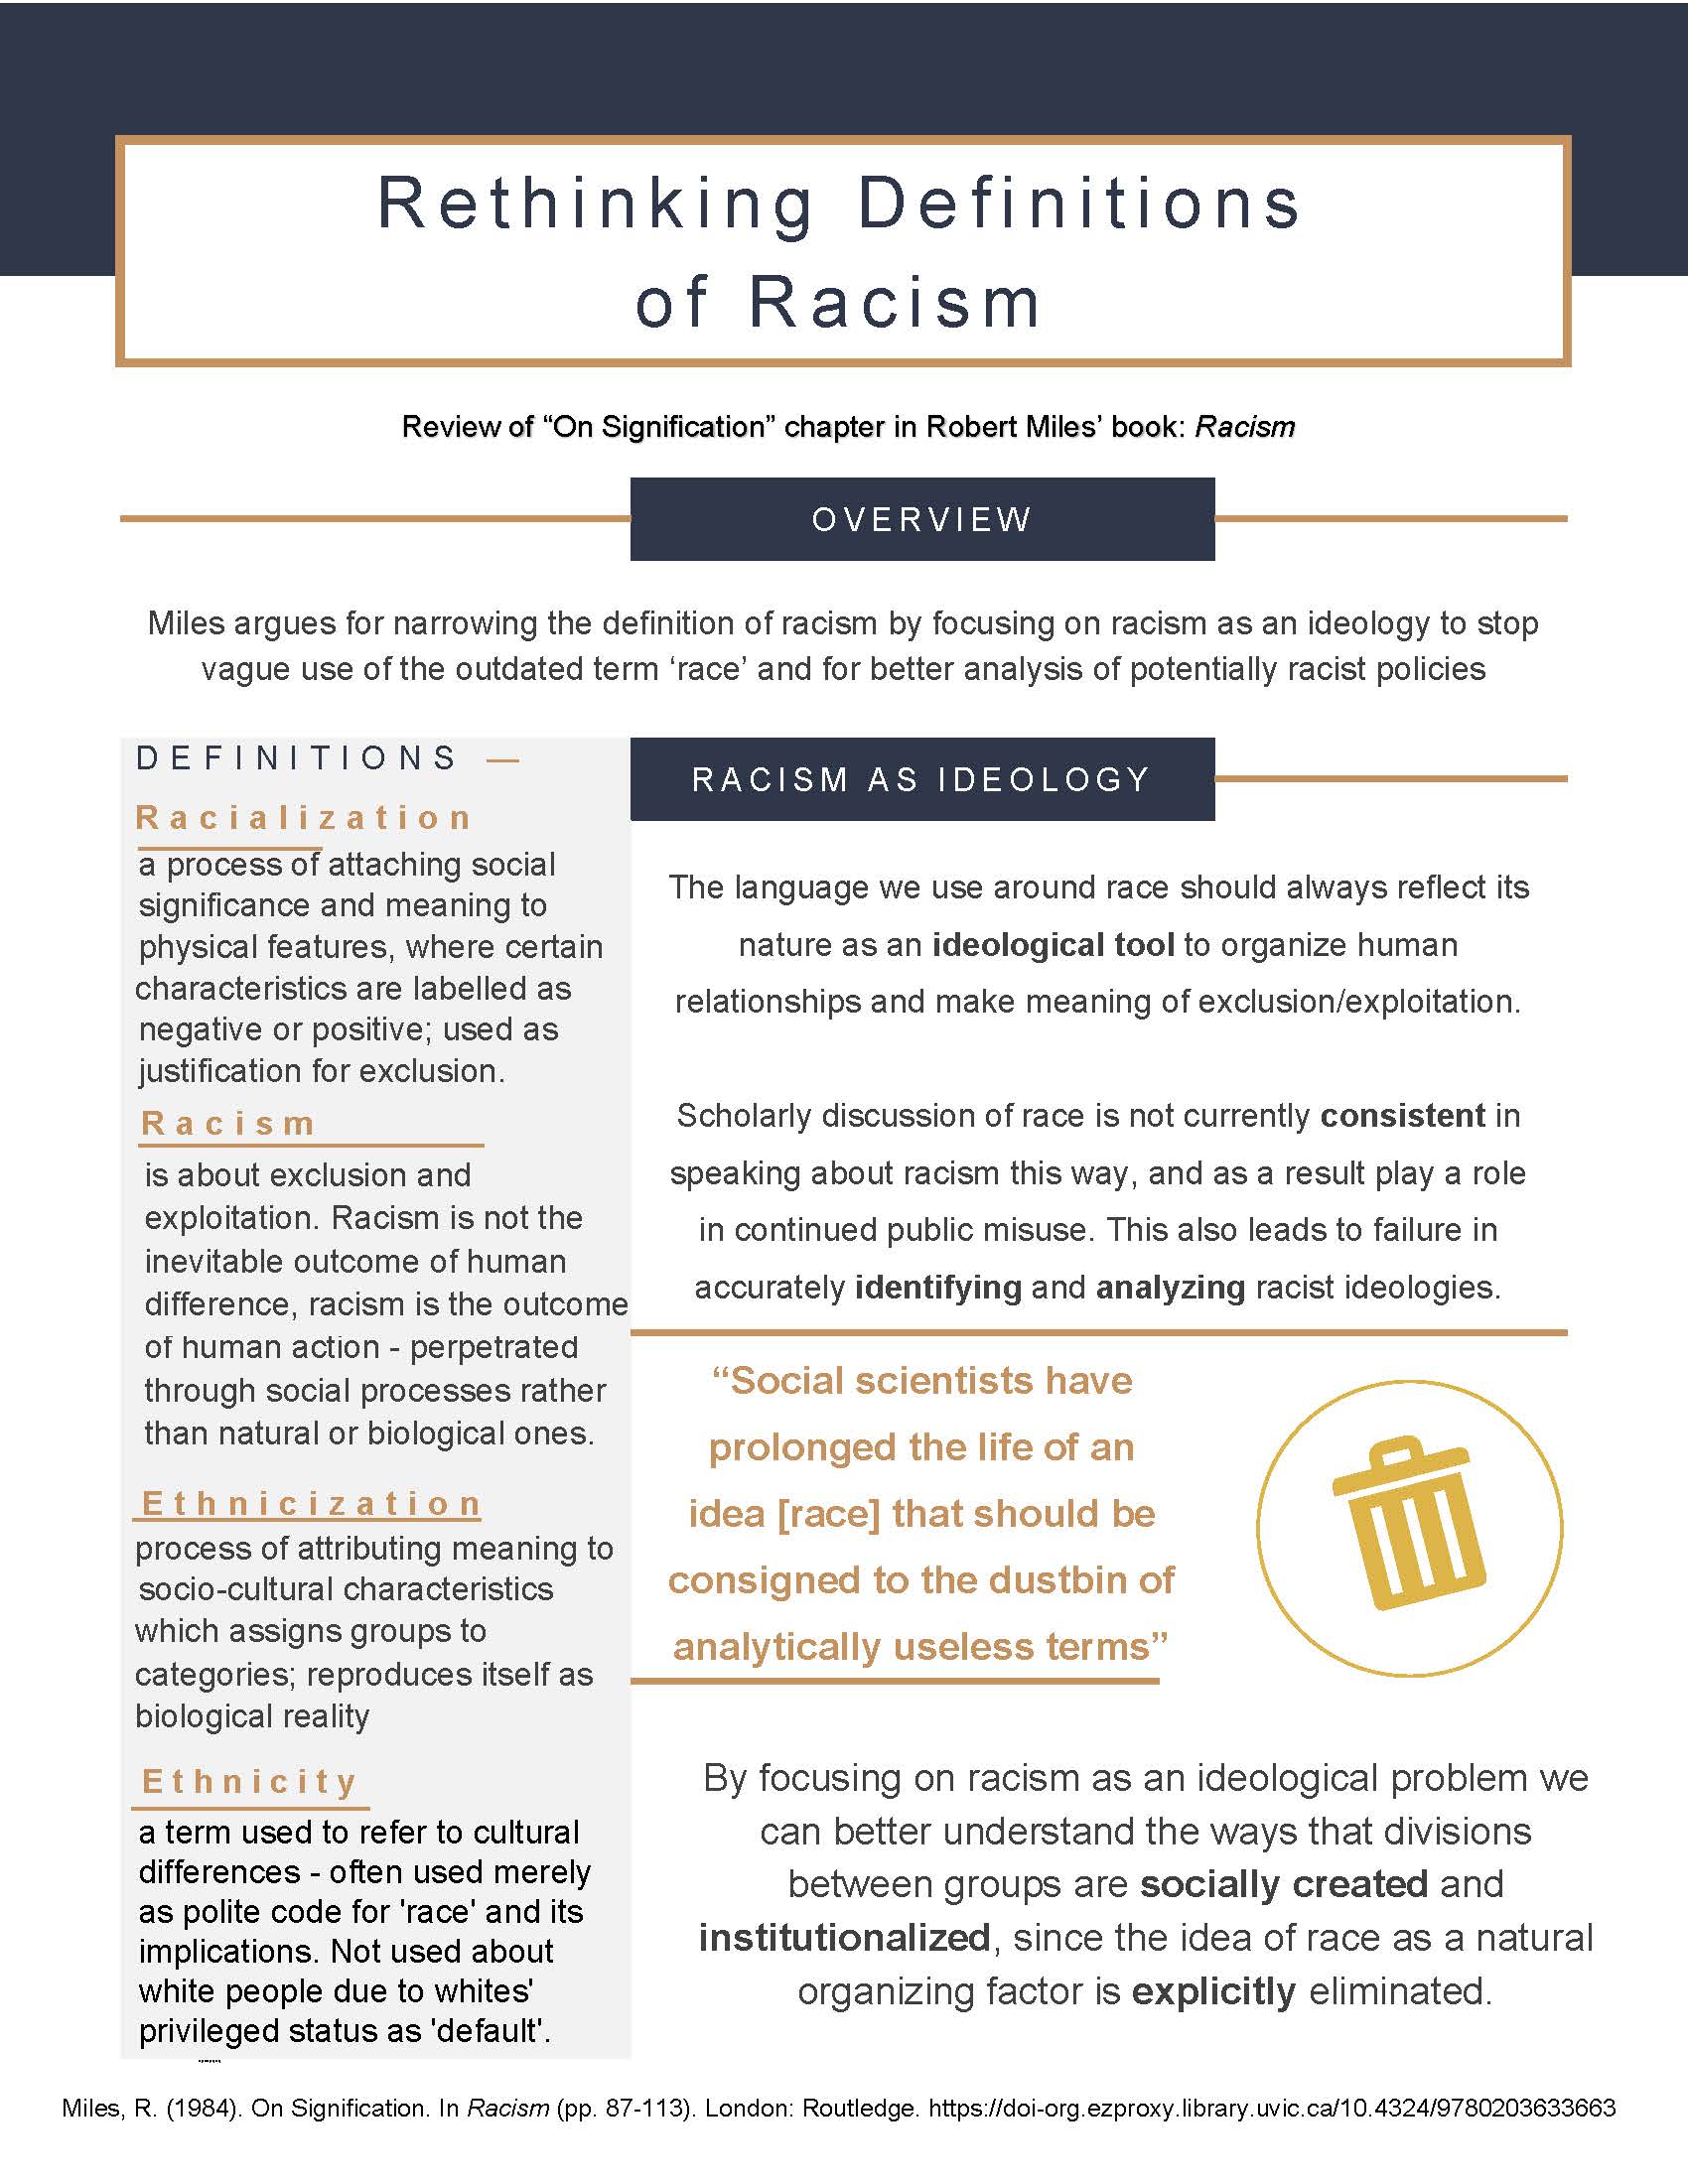 Rethinking-Definitions-of-racism.-S.L._Page_1.jpg